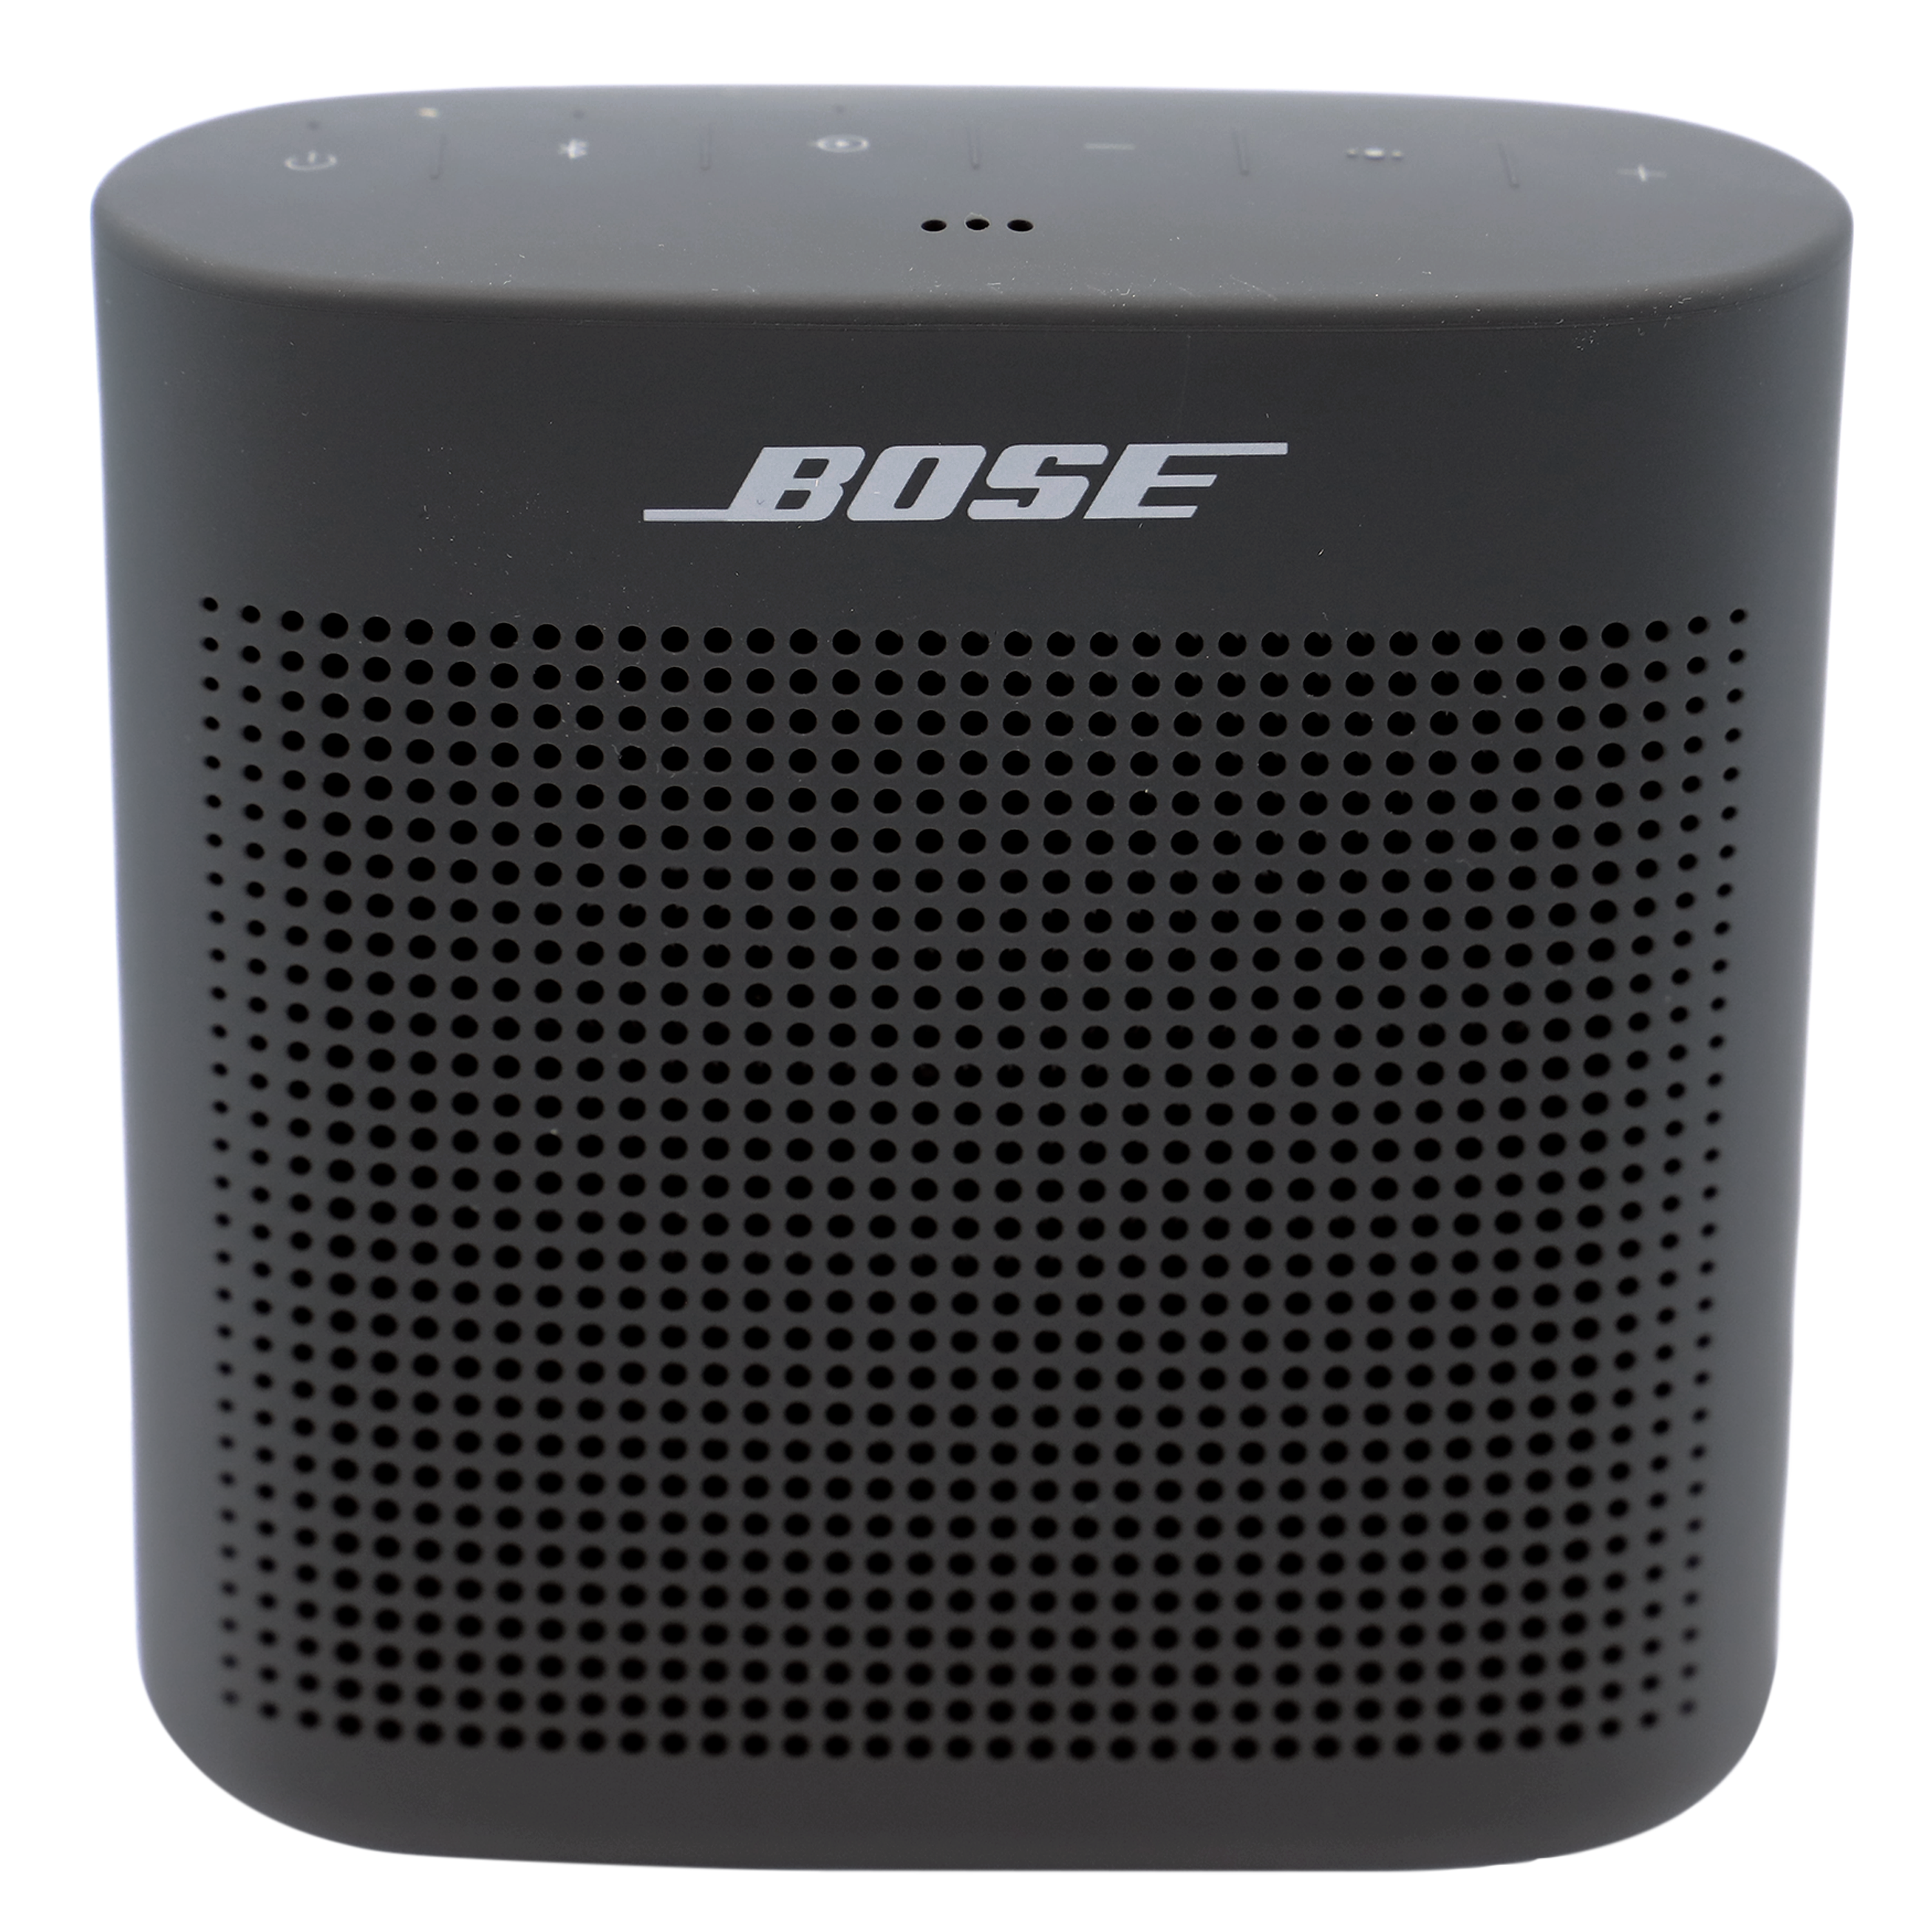 Bose Color Bluetooth (US) from $4.90 per month